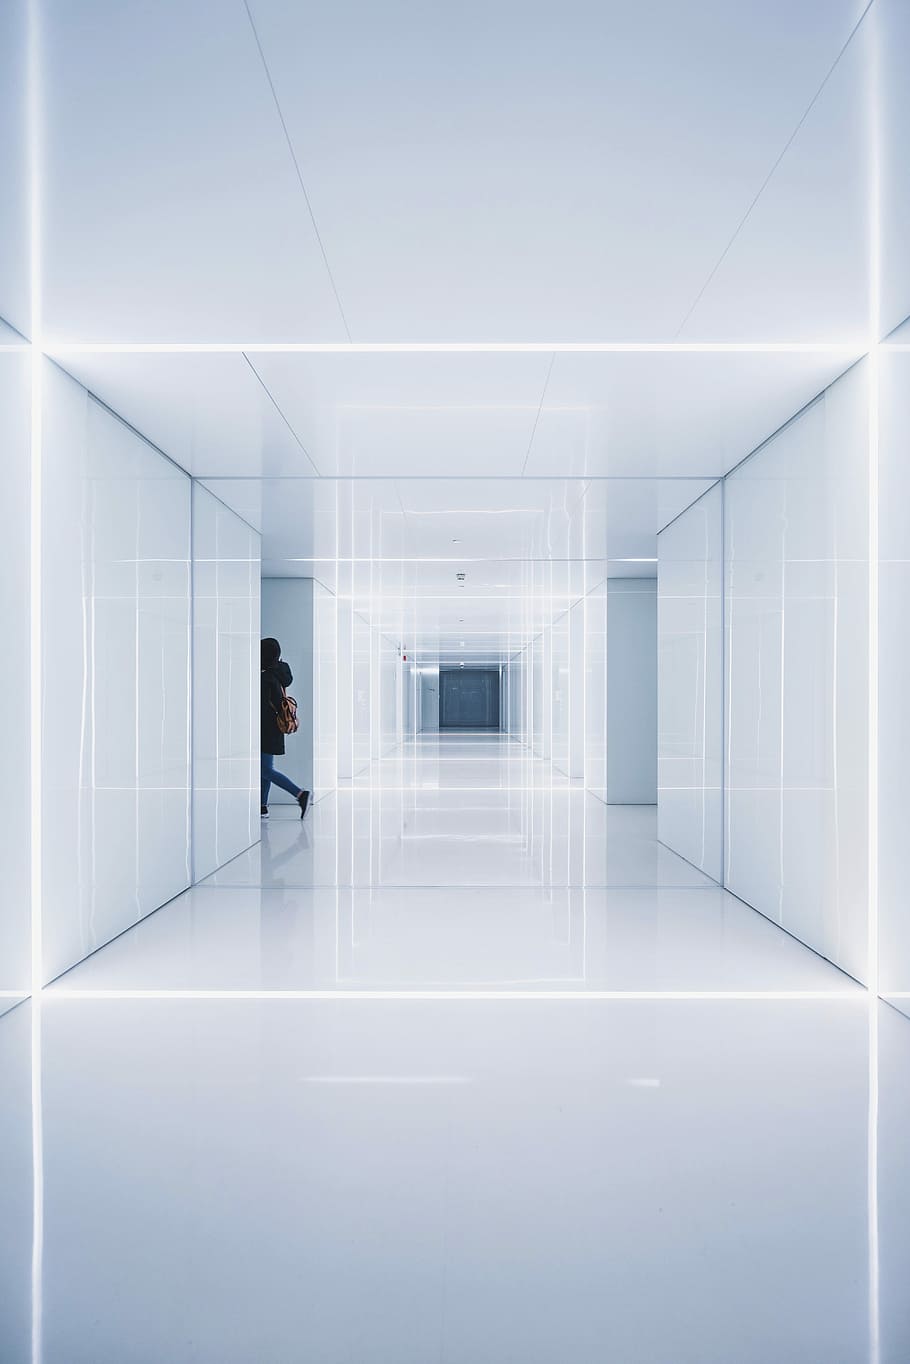 In Time, white ceramic tiles, light, architecture, person, walking